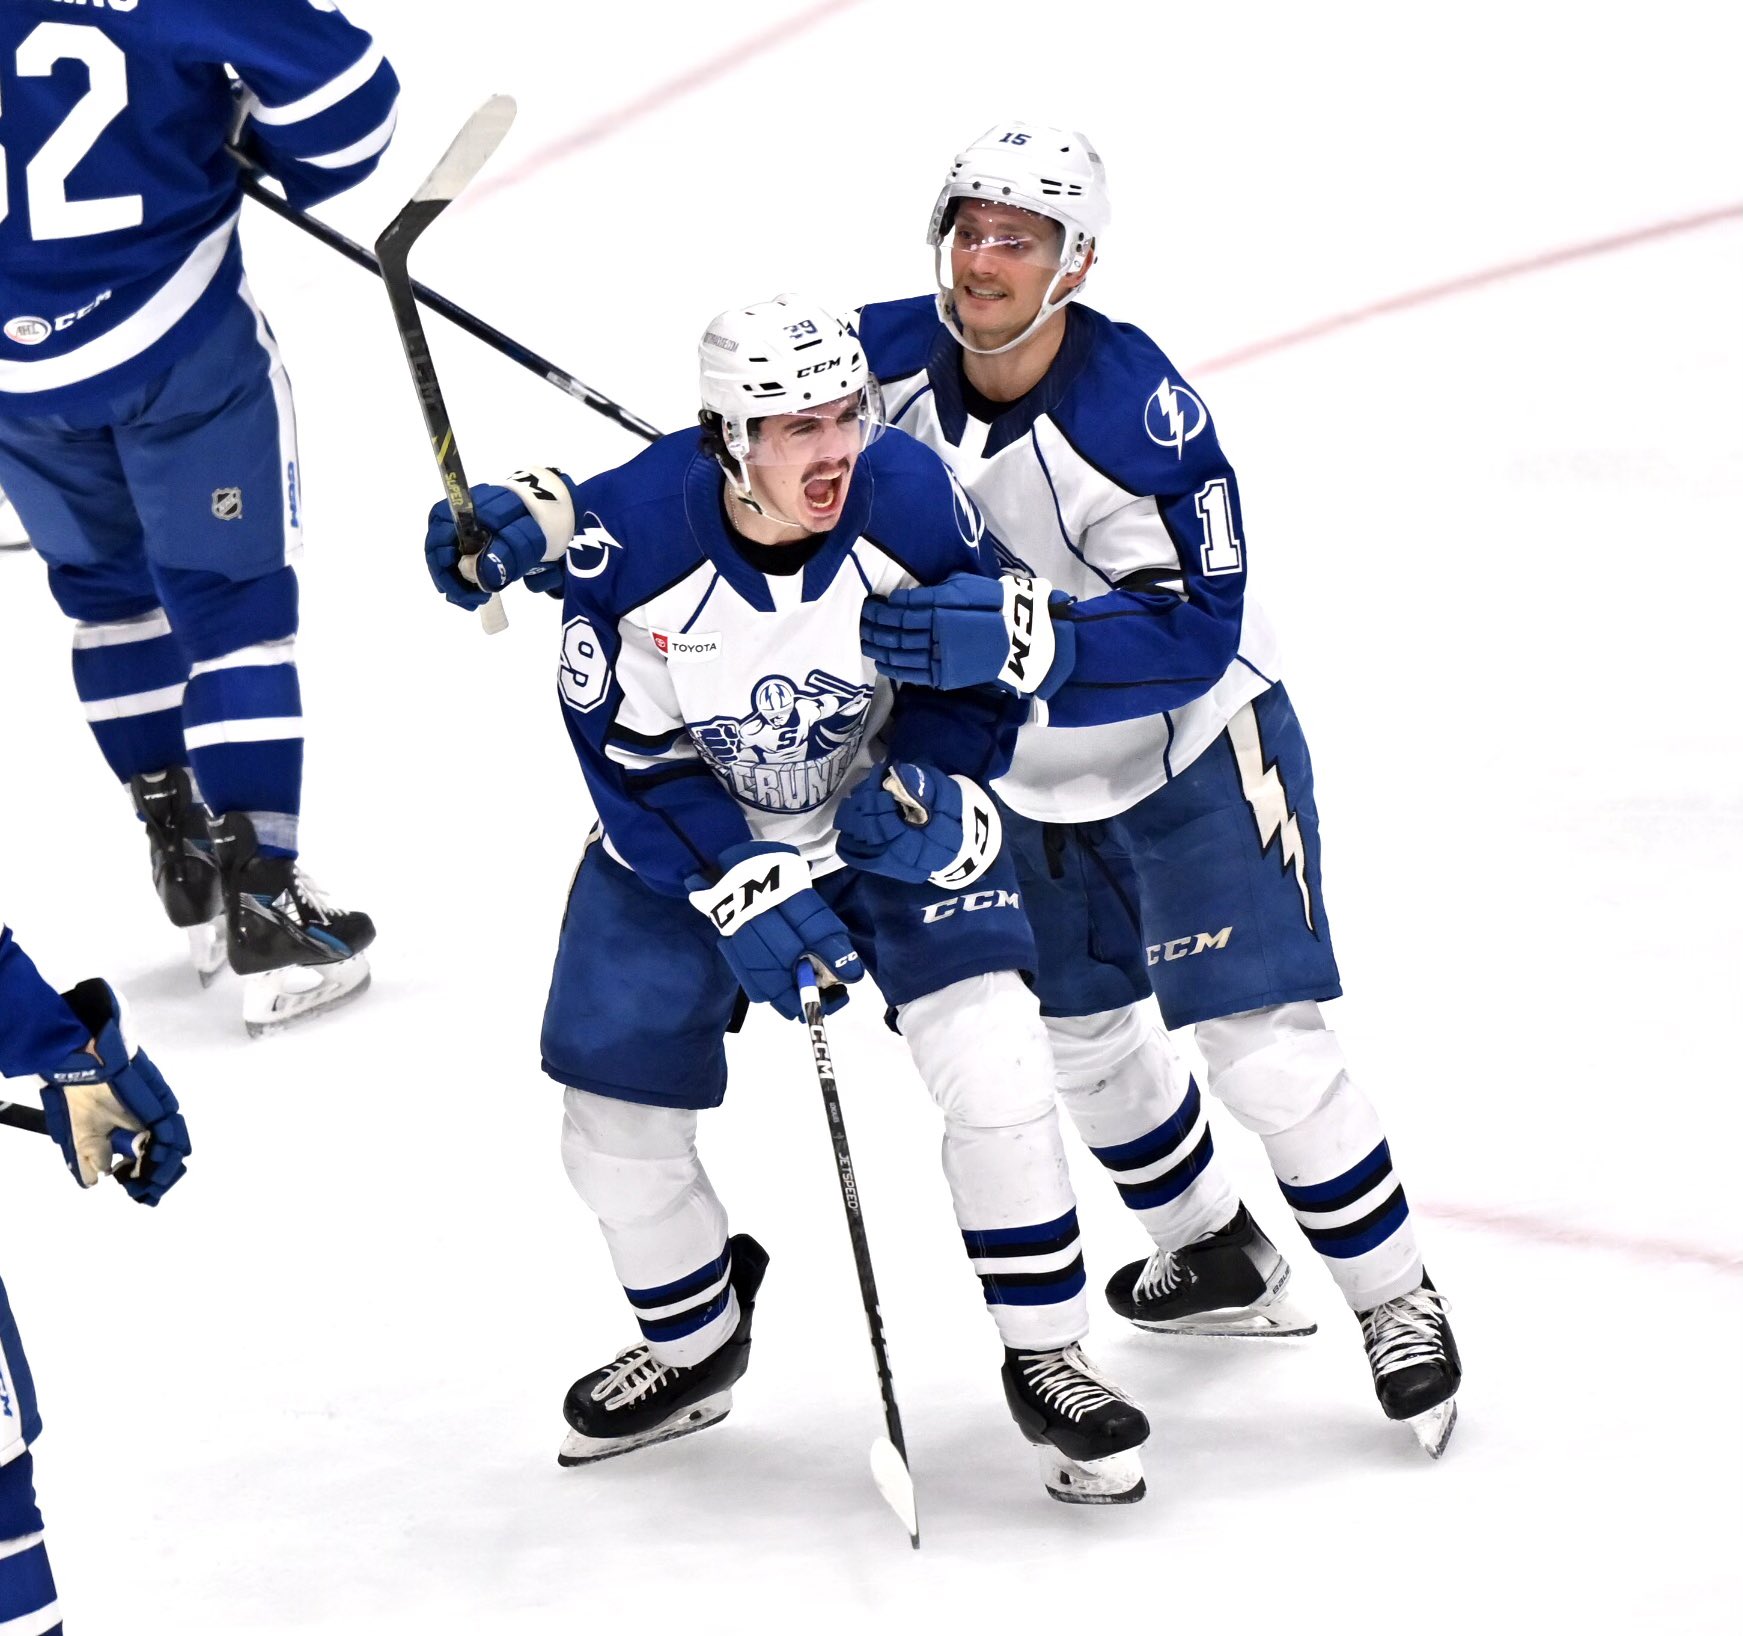 Crunch top Marlies for fifth straight win